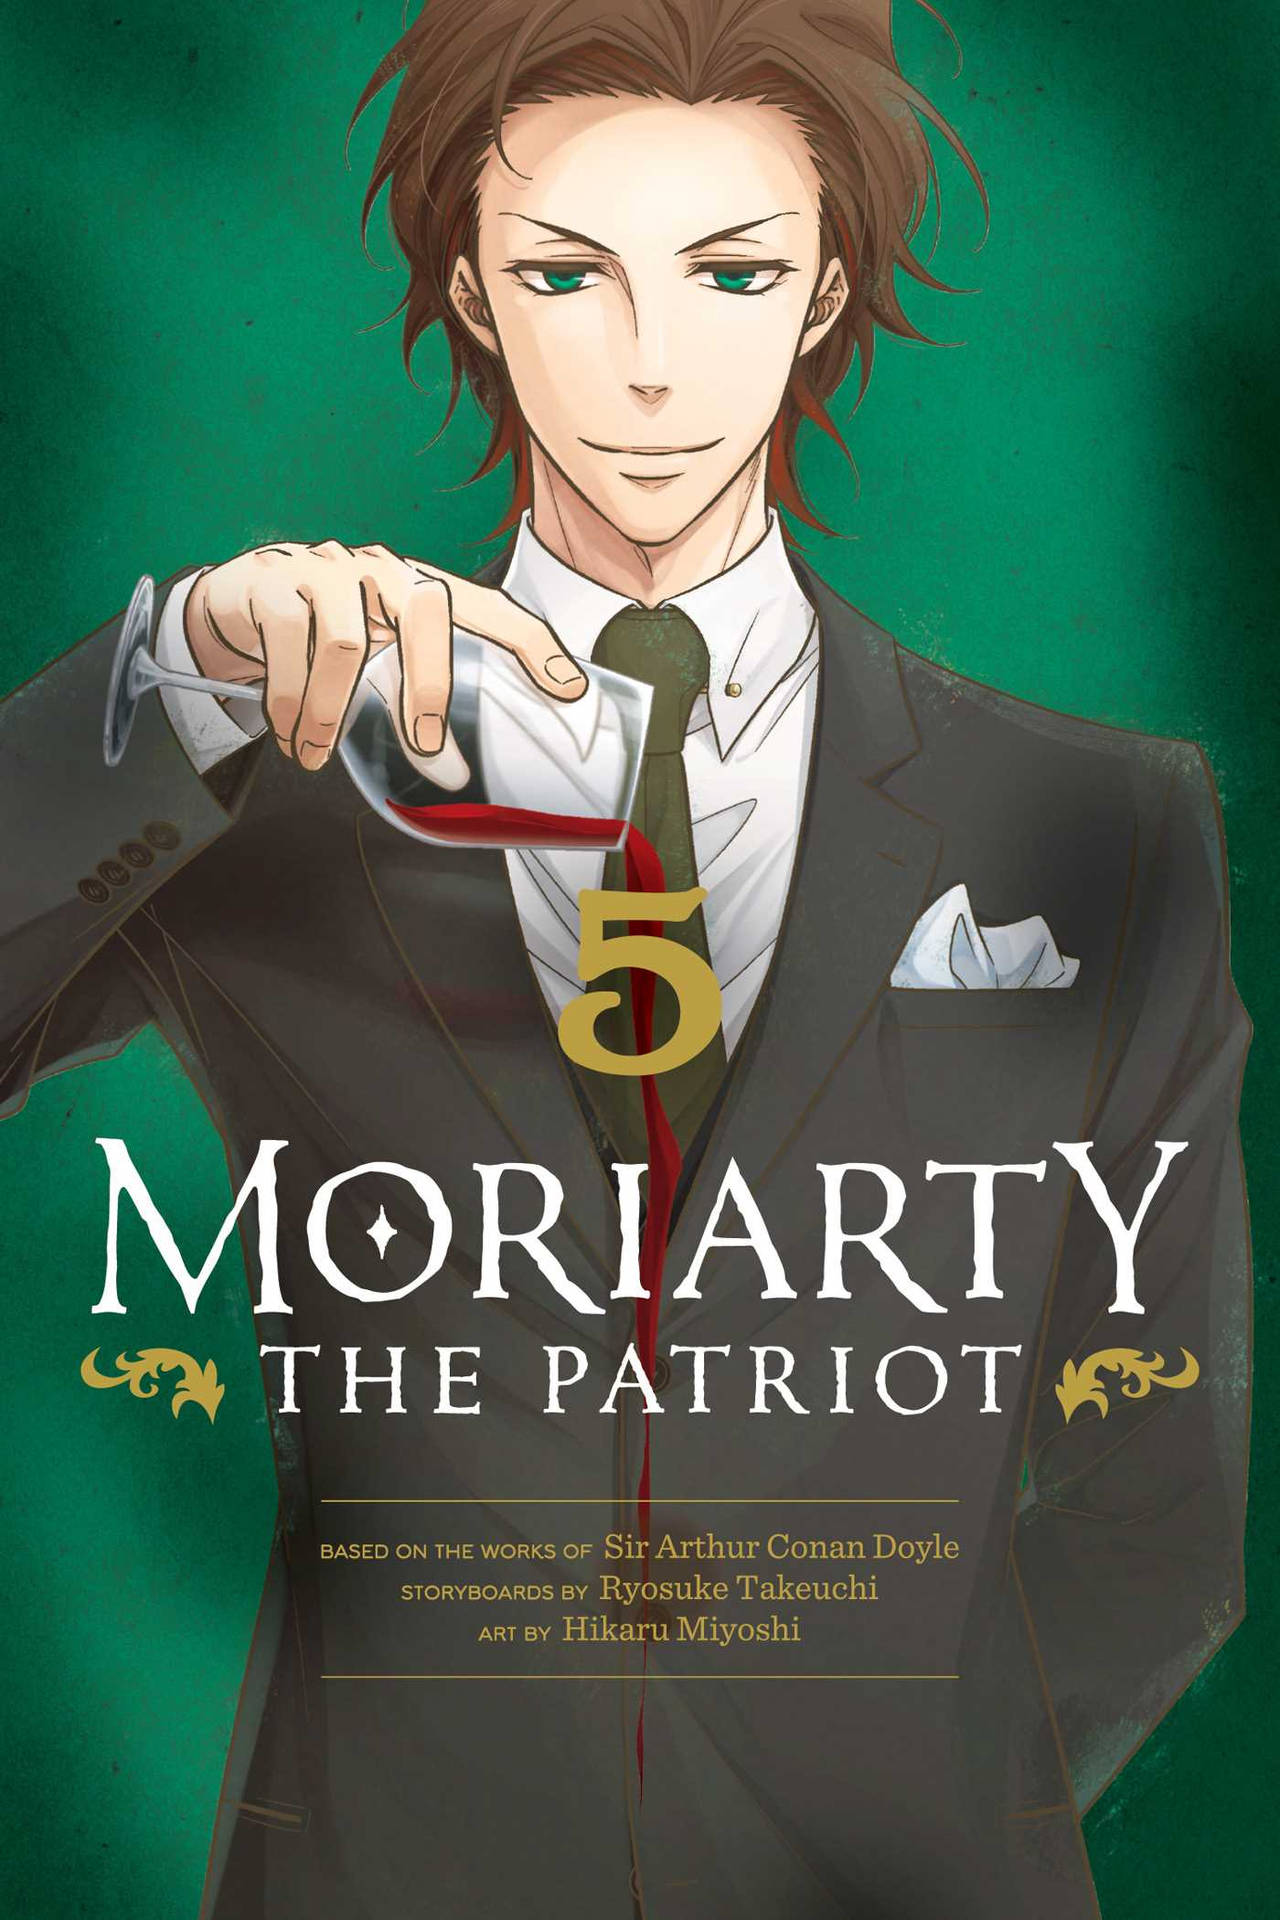 Moriarty The Patriot Albert Moriarty Poster Background